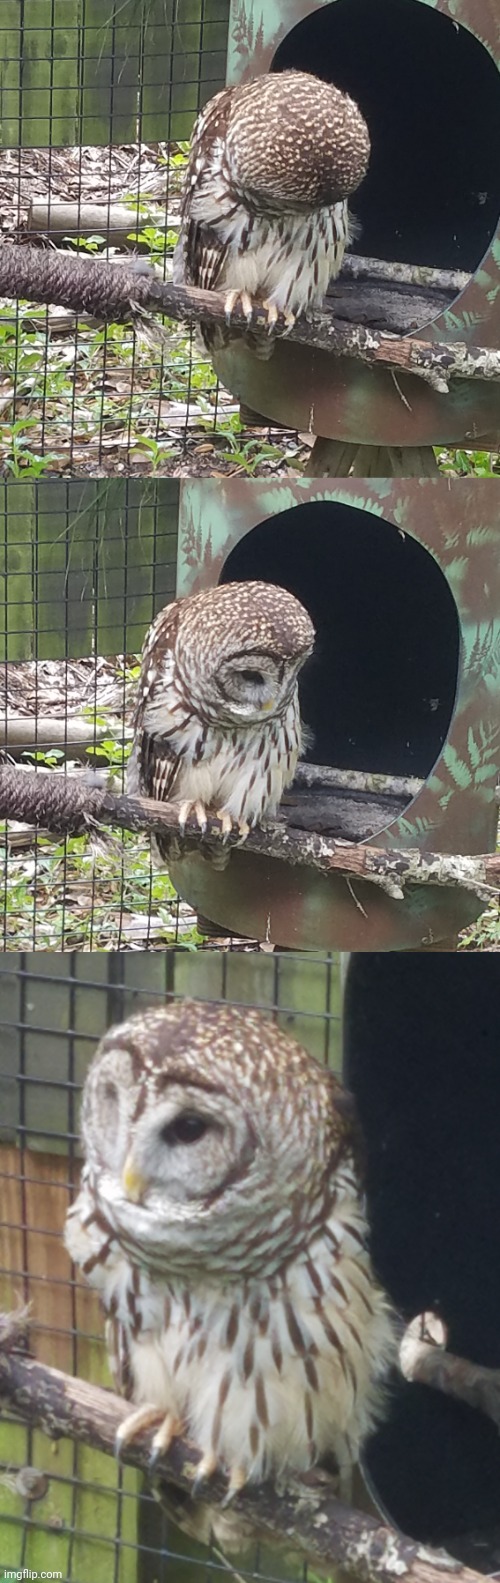 An owl at the zoo | image tagged in owl | made w/ Imgflip meme maker